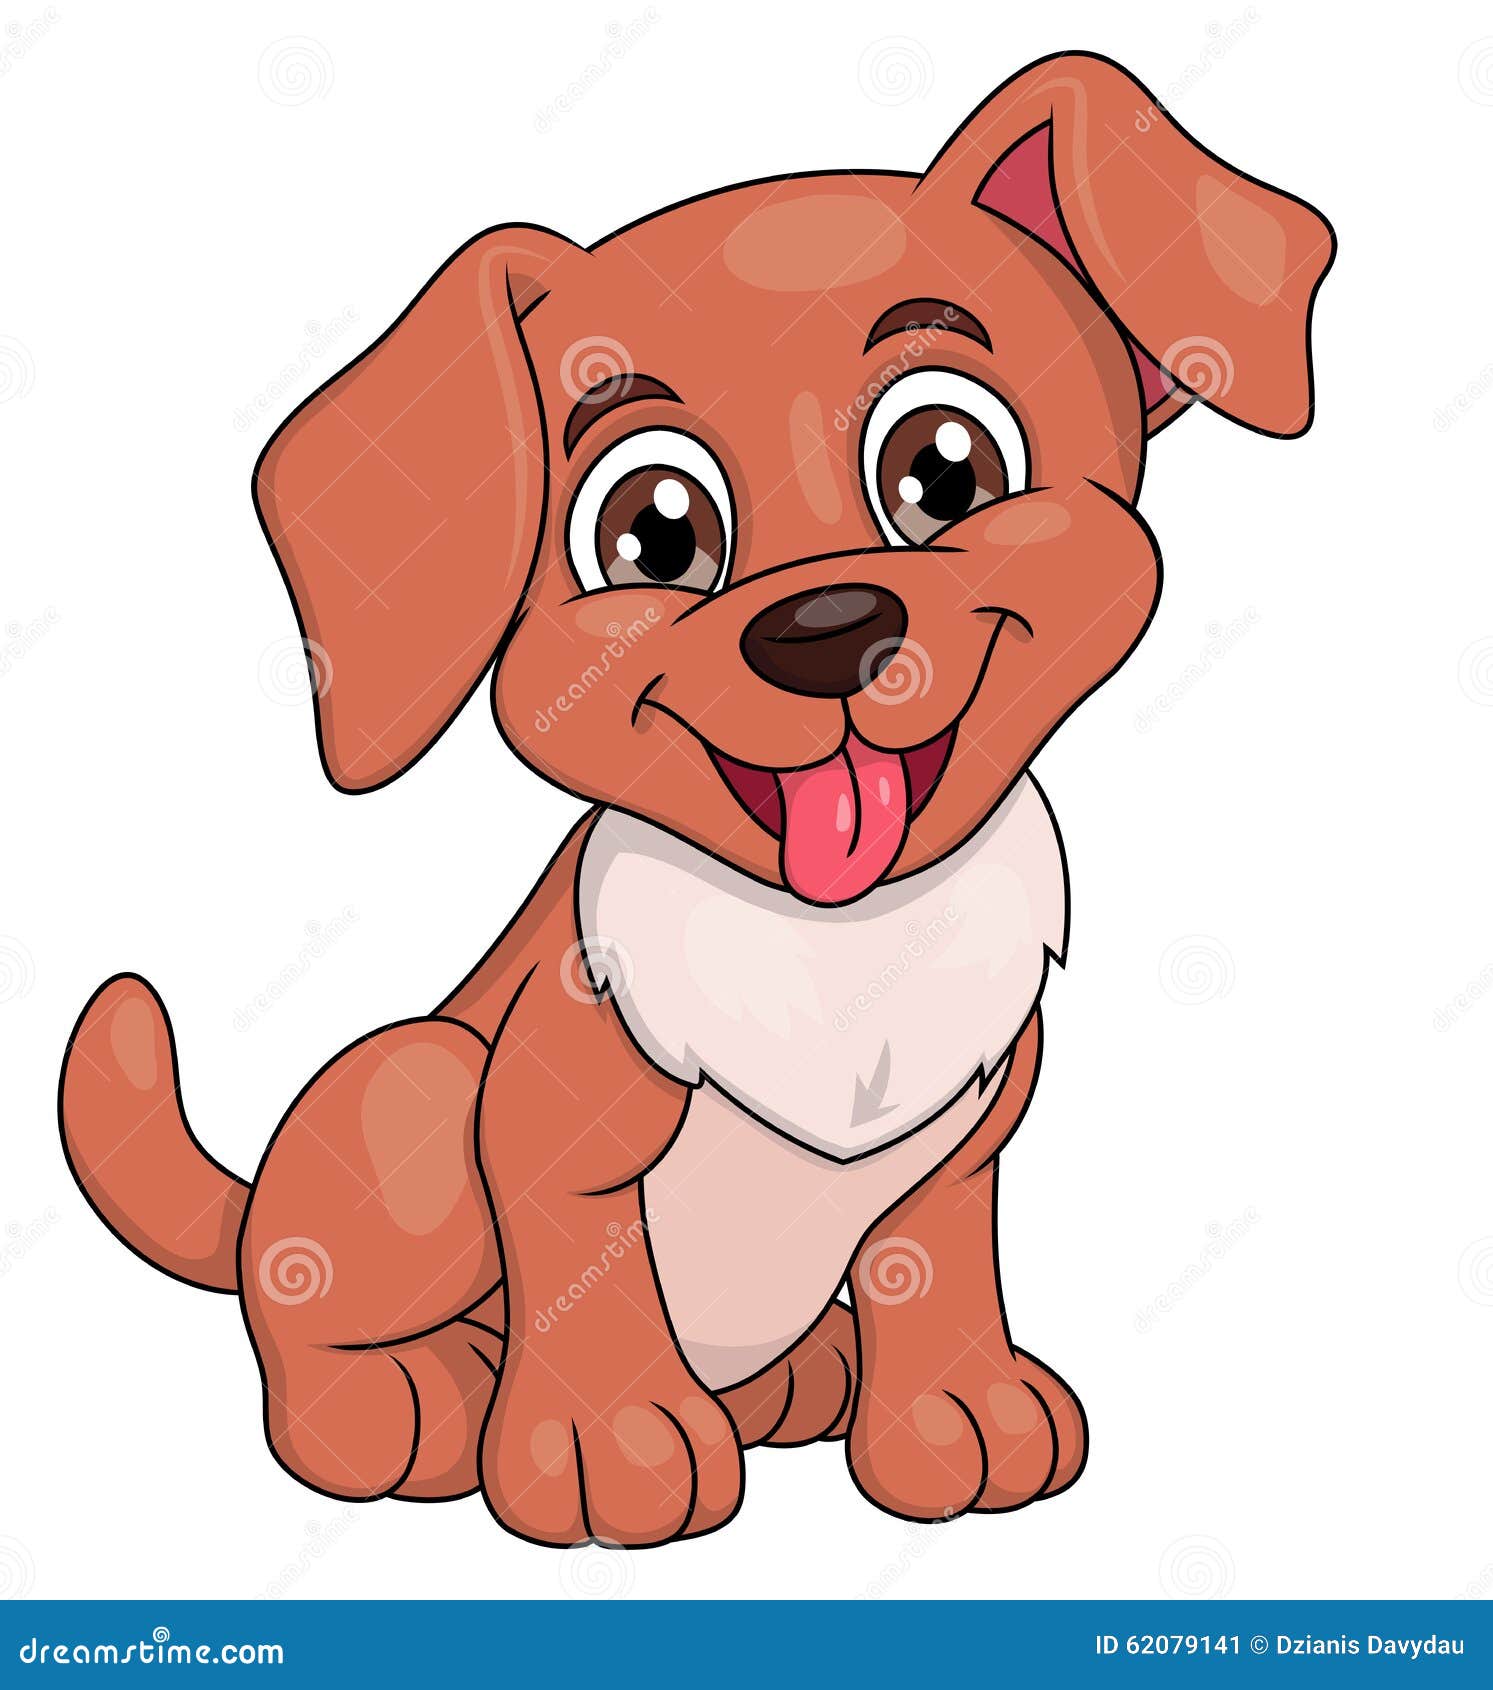 Smiling little puppy 2 stock vector. Illustration of doggy - 62079141